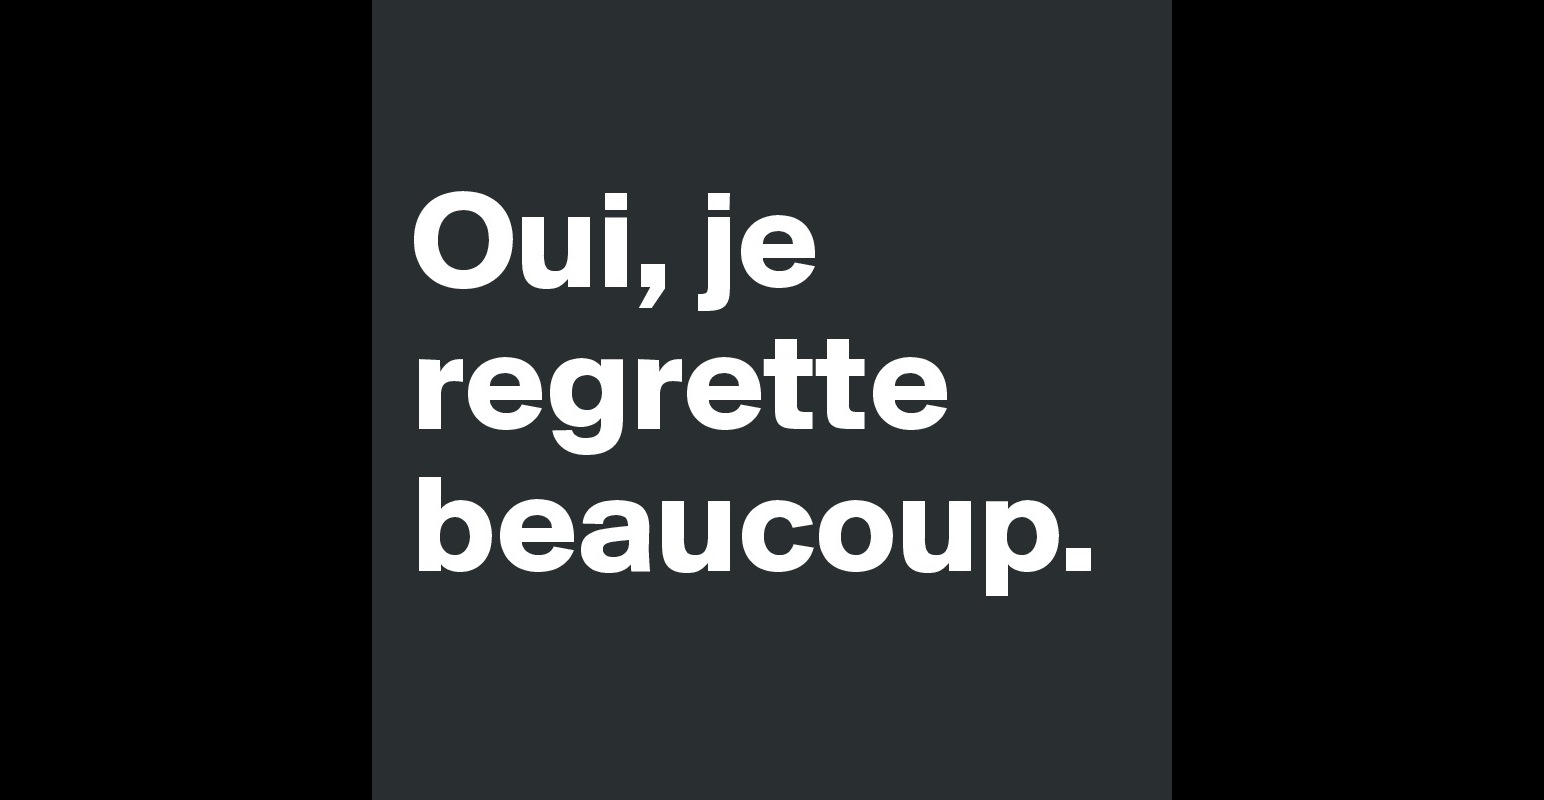 Oui, je regrette beaucoup. - Post by sarcaSM on Boldomatic